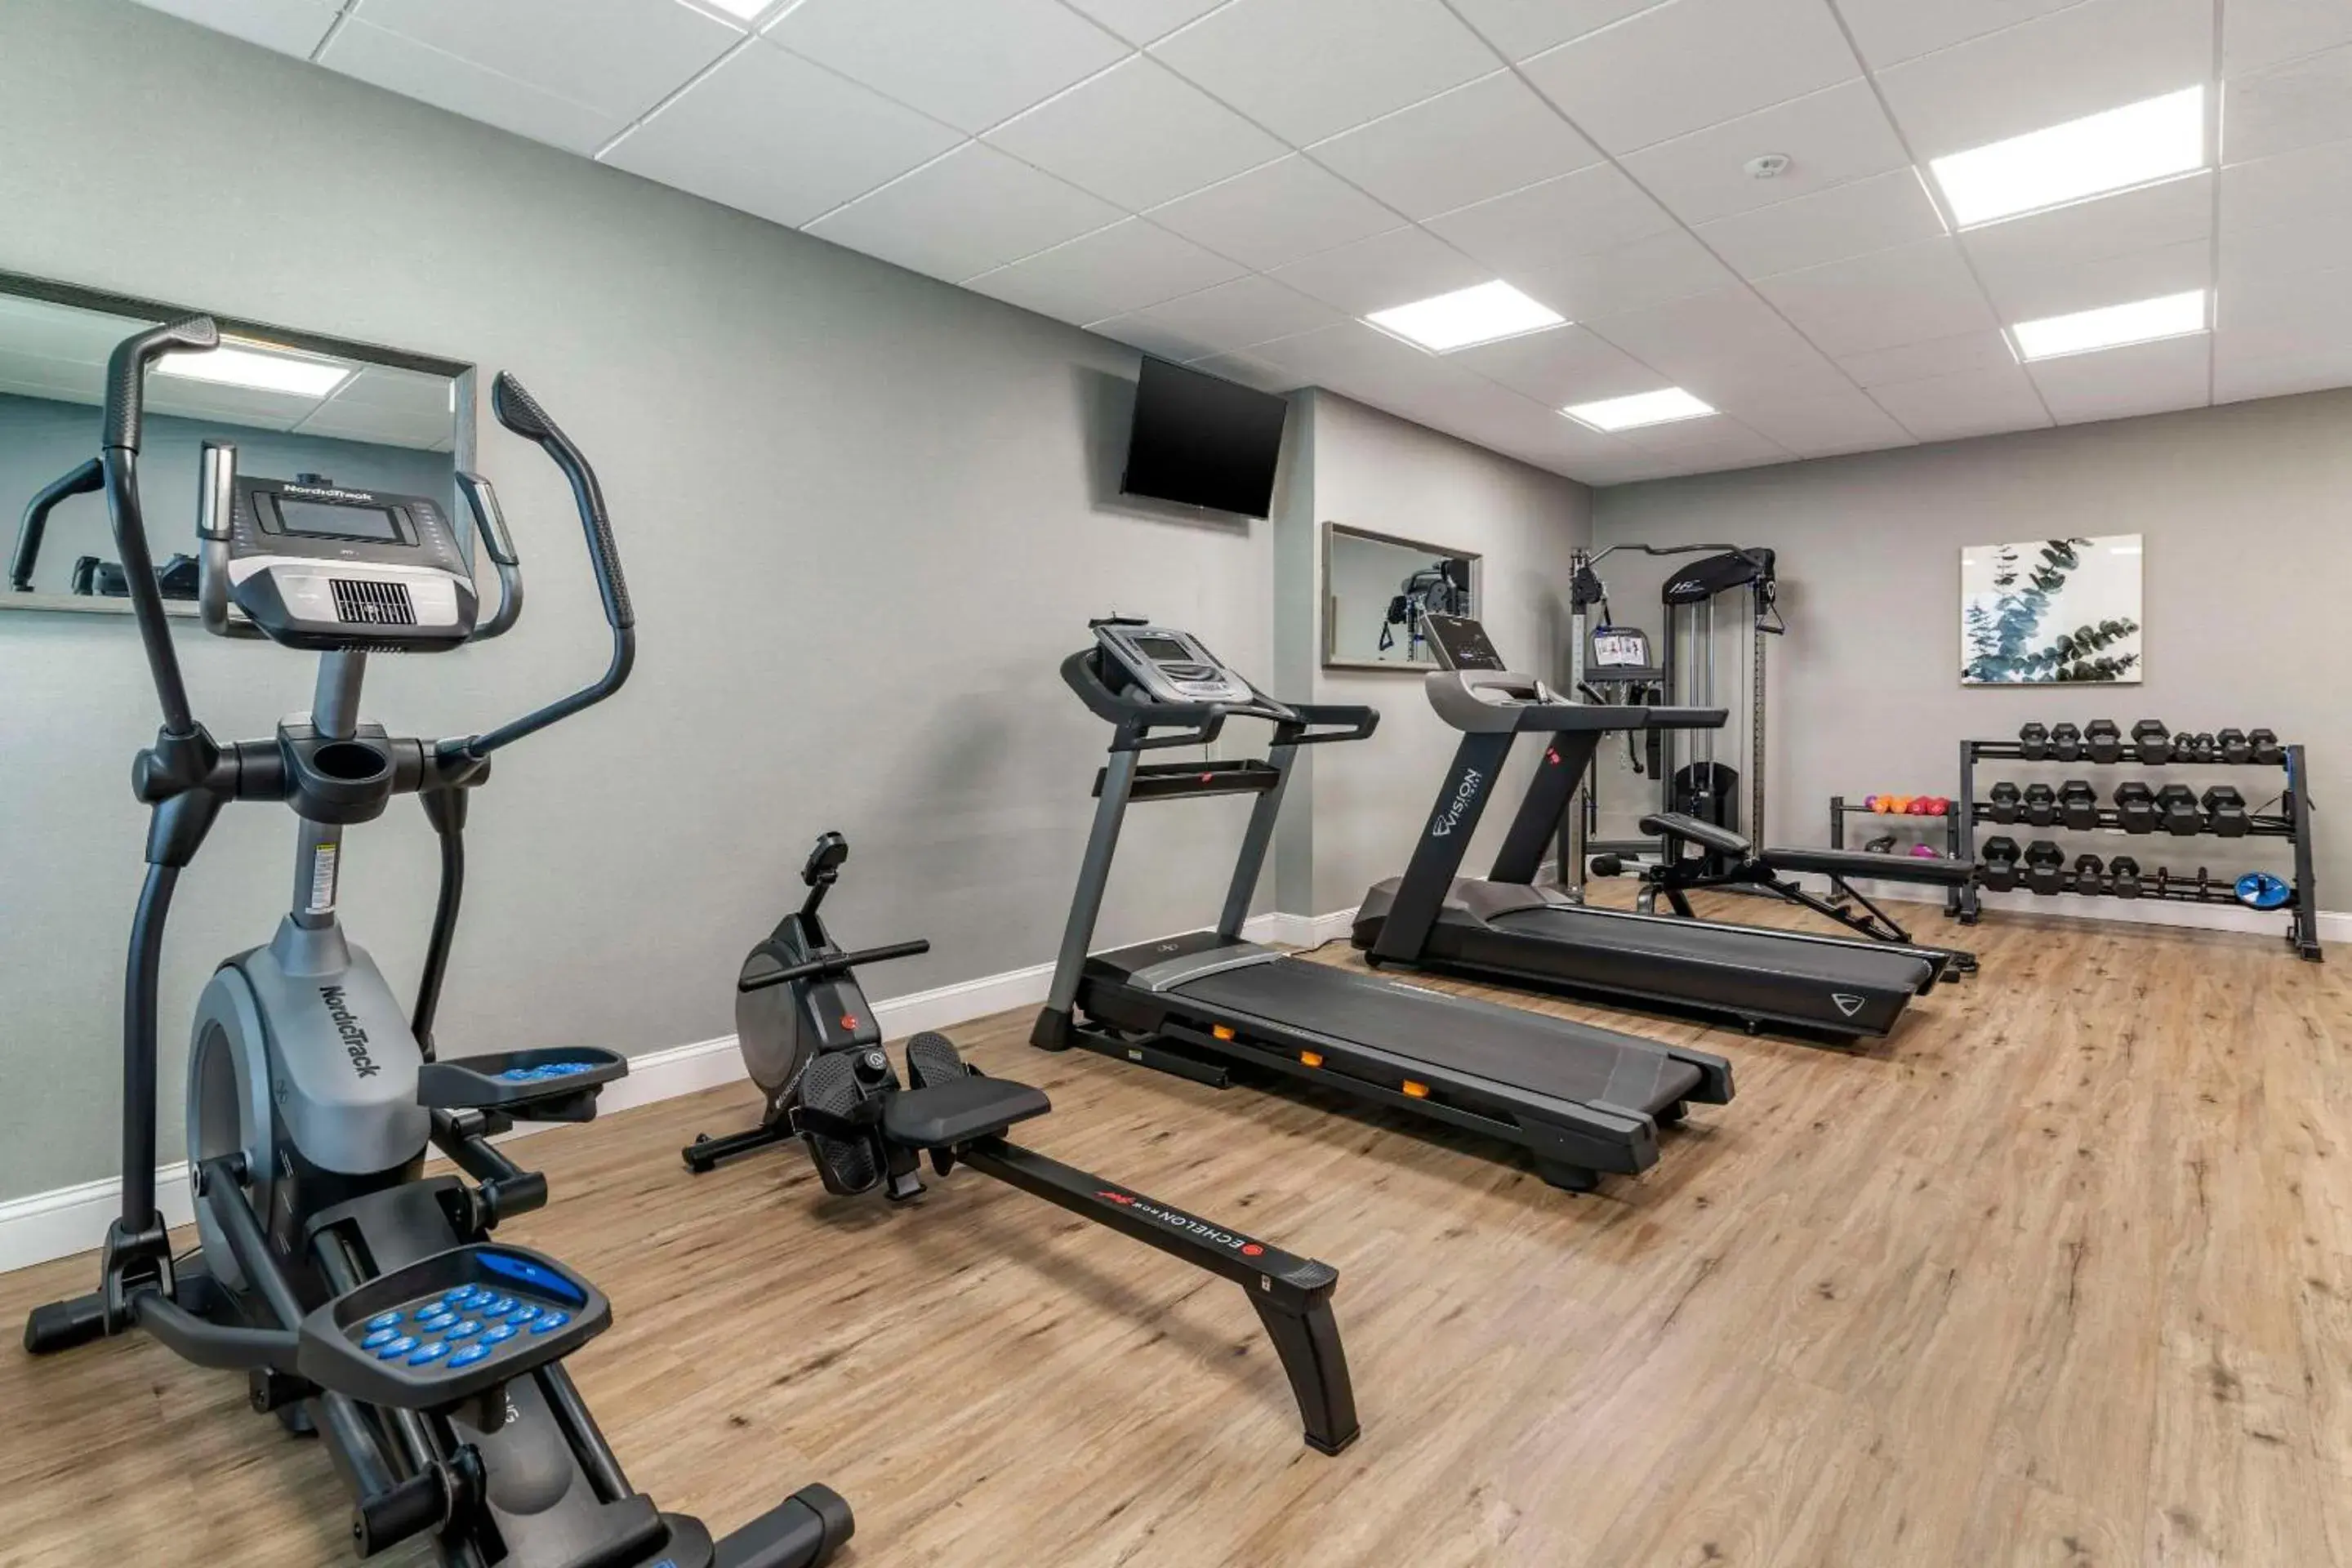 Fitness centre/facilities, Fitness Center/Facilities in Casco Bay Hotel, Ascend Hotel Collection